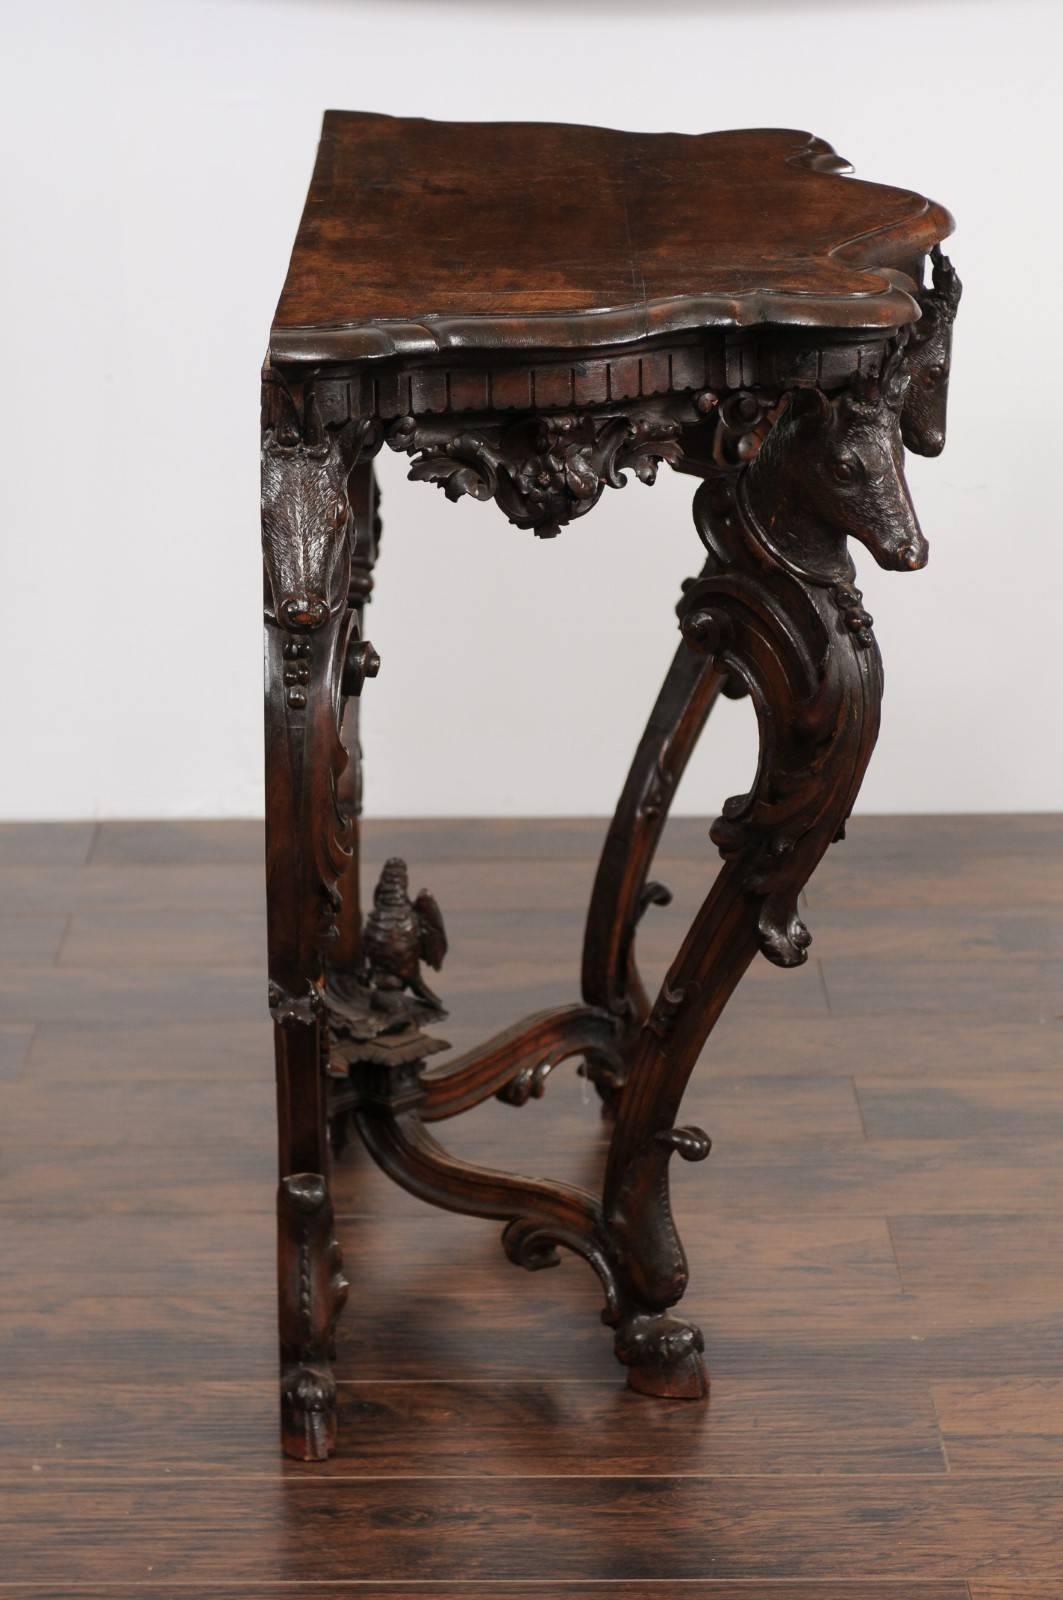 An English Rococo style richly carved oak console table with deer heads and hoofed legs from the late 19th century. This English console table features a nicely shaped planked top with beveled edges, sitting above an exquisite Rococo style base,